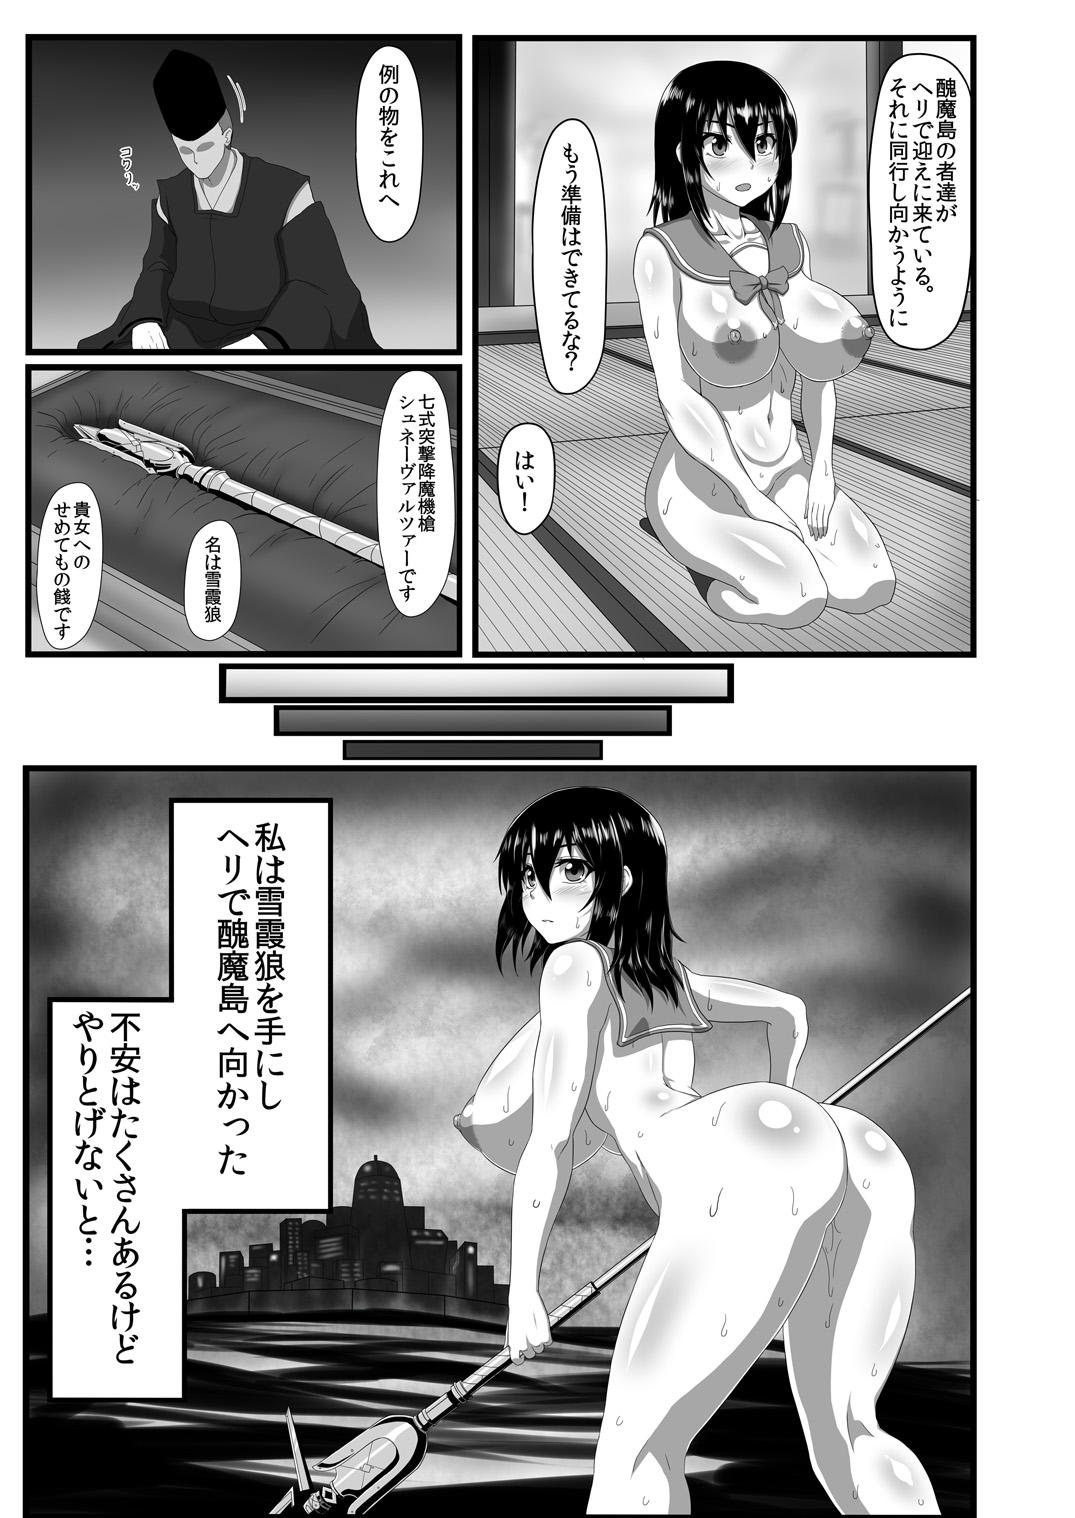 Moaning Slave the Blood - Strike the blood Outdoor Sex - Page 10